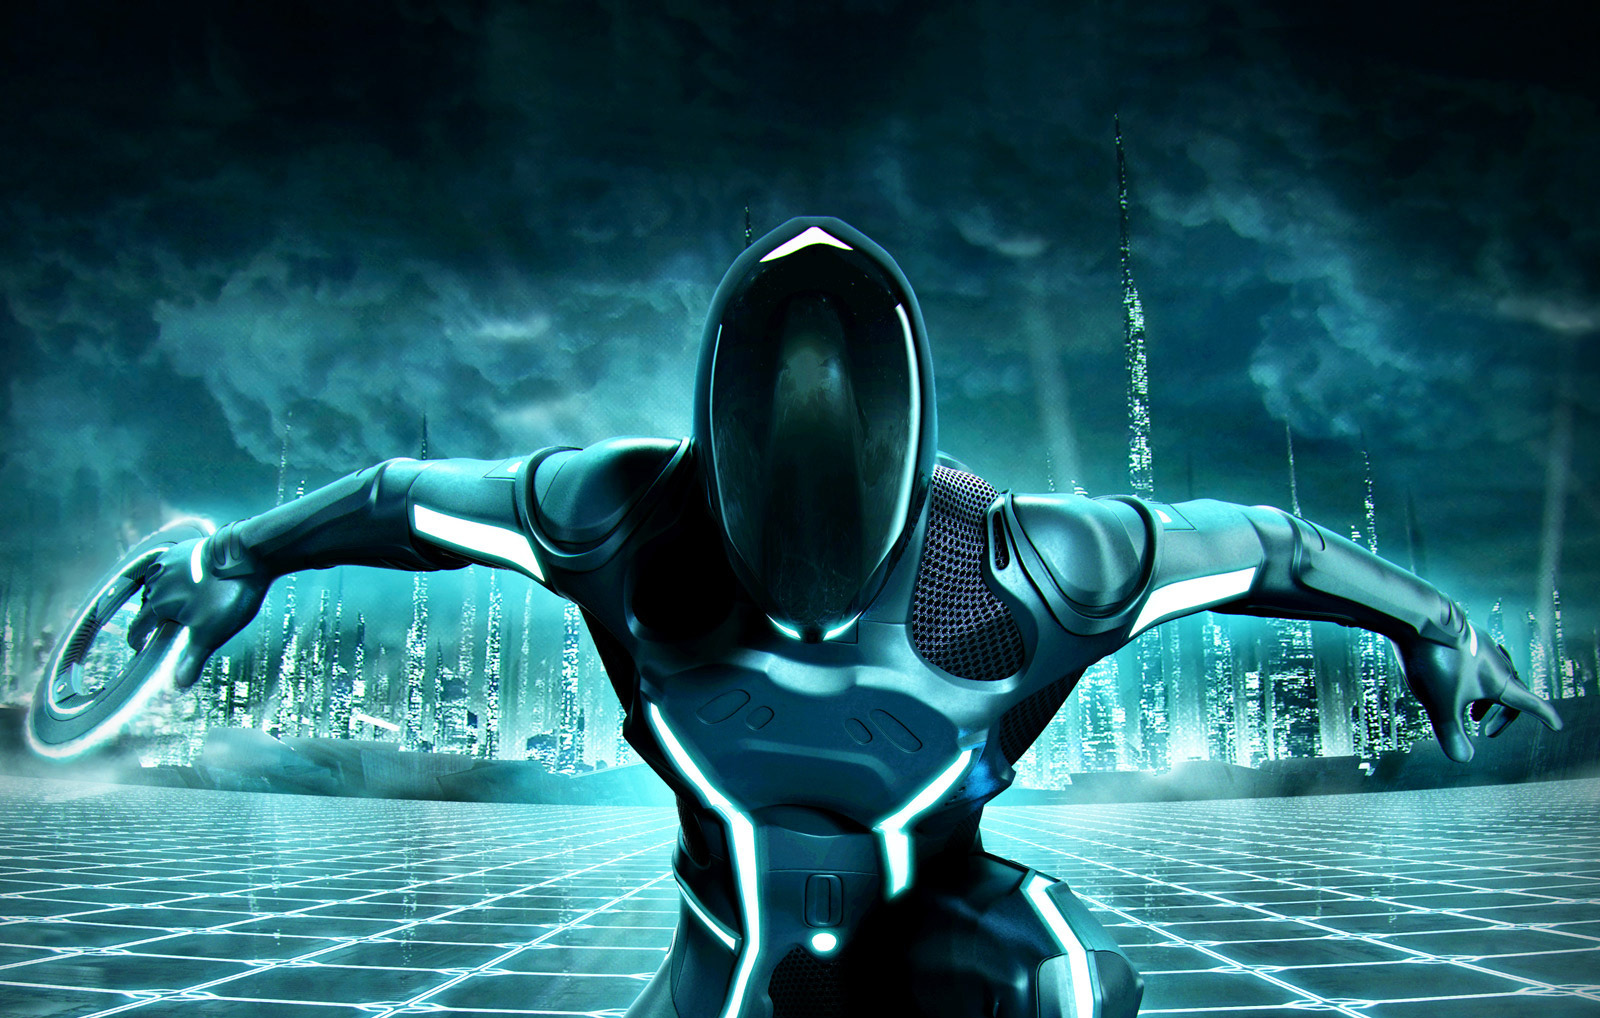 tron legacy ost download zippy download